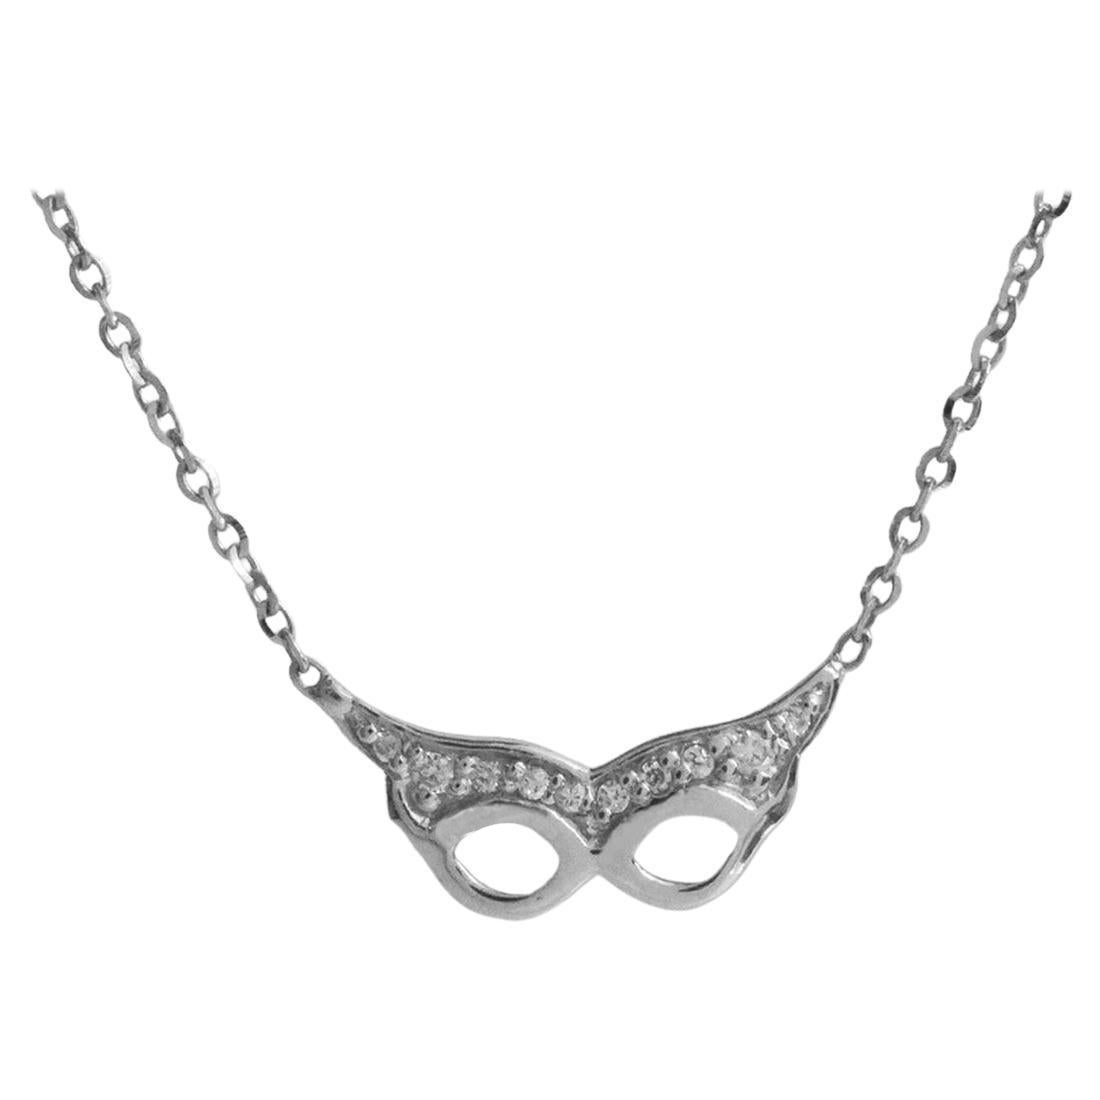 Masquerade Mask Diamond Necklace is made of 18k solid gold available in three colors, White Gold / Rose Gold / Yellow Gold.

Natural genuine round cut diamond, each diamond is hand selected by me to ensure quality and set by a master setter in our